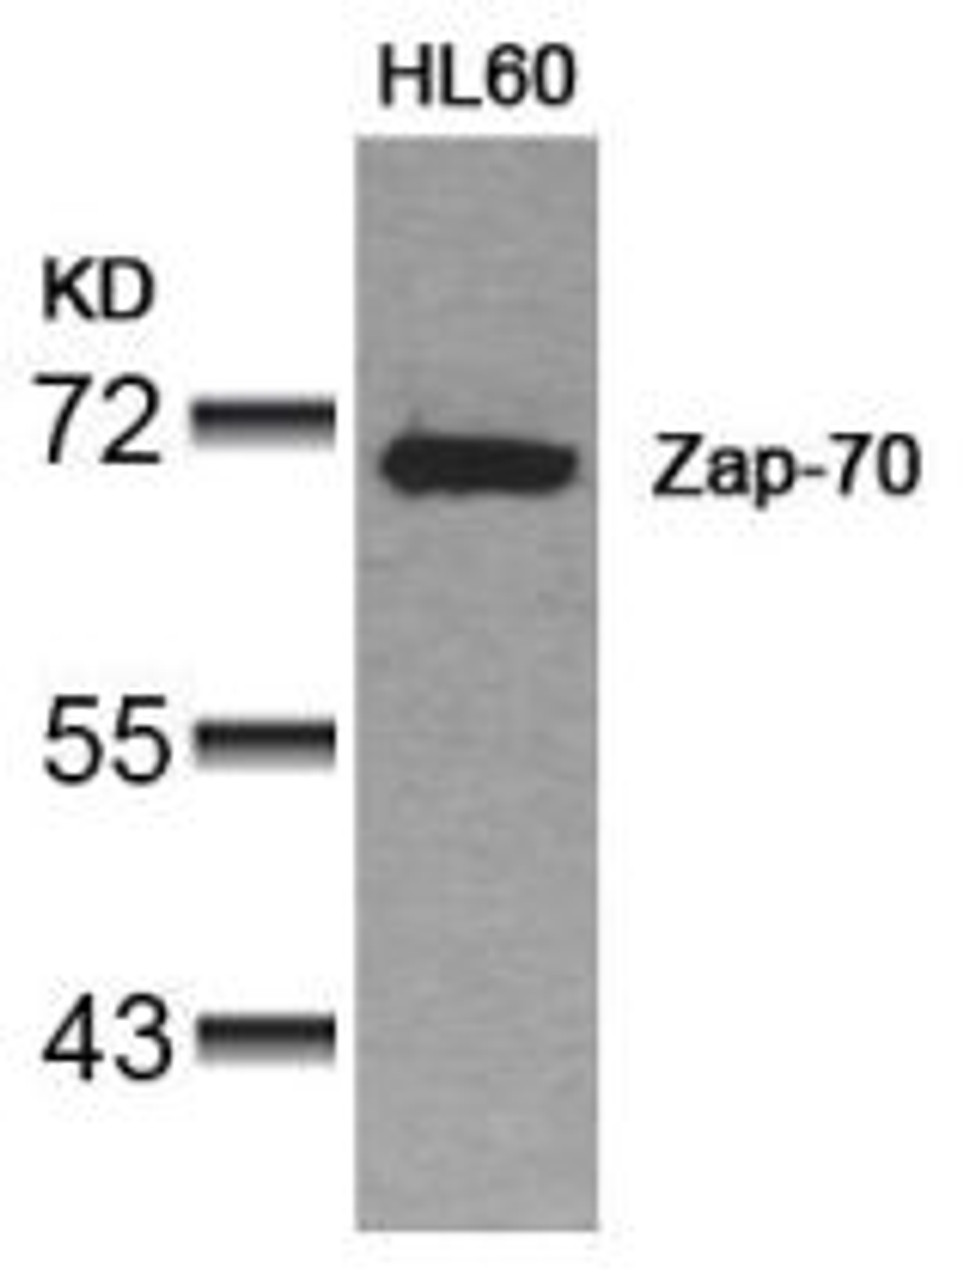 Western blot analysis of lysed extracts from HL60 cells using Zap-70 (Ab-319) .